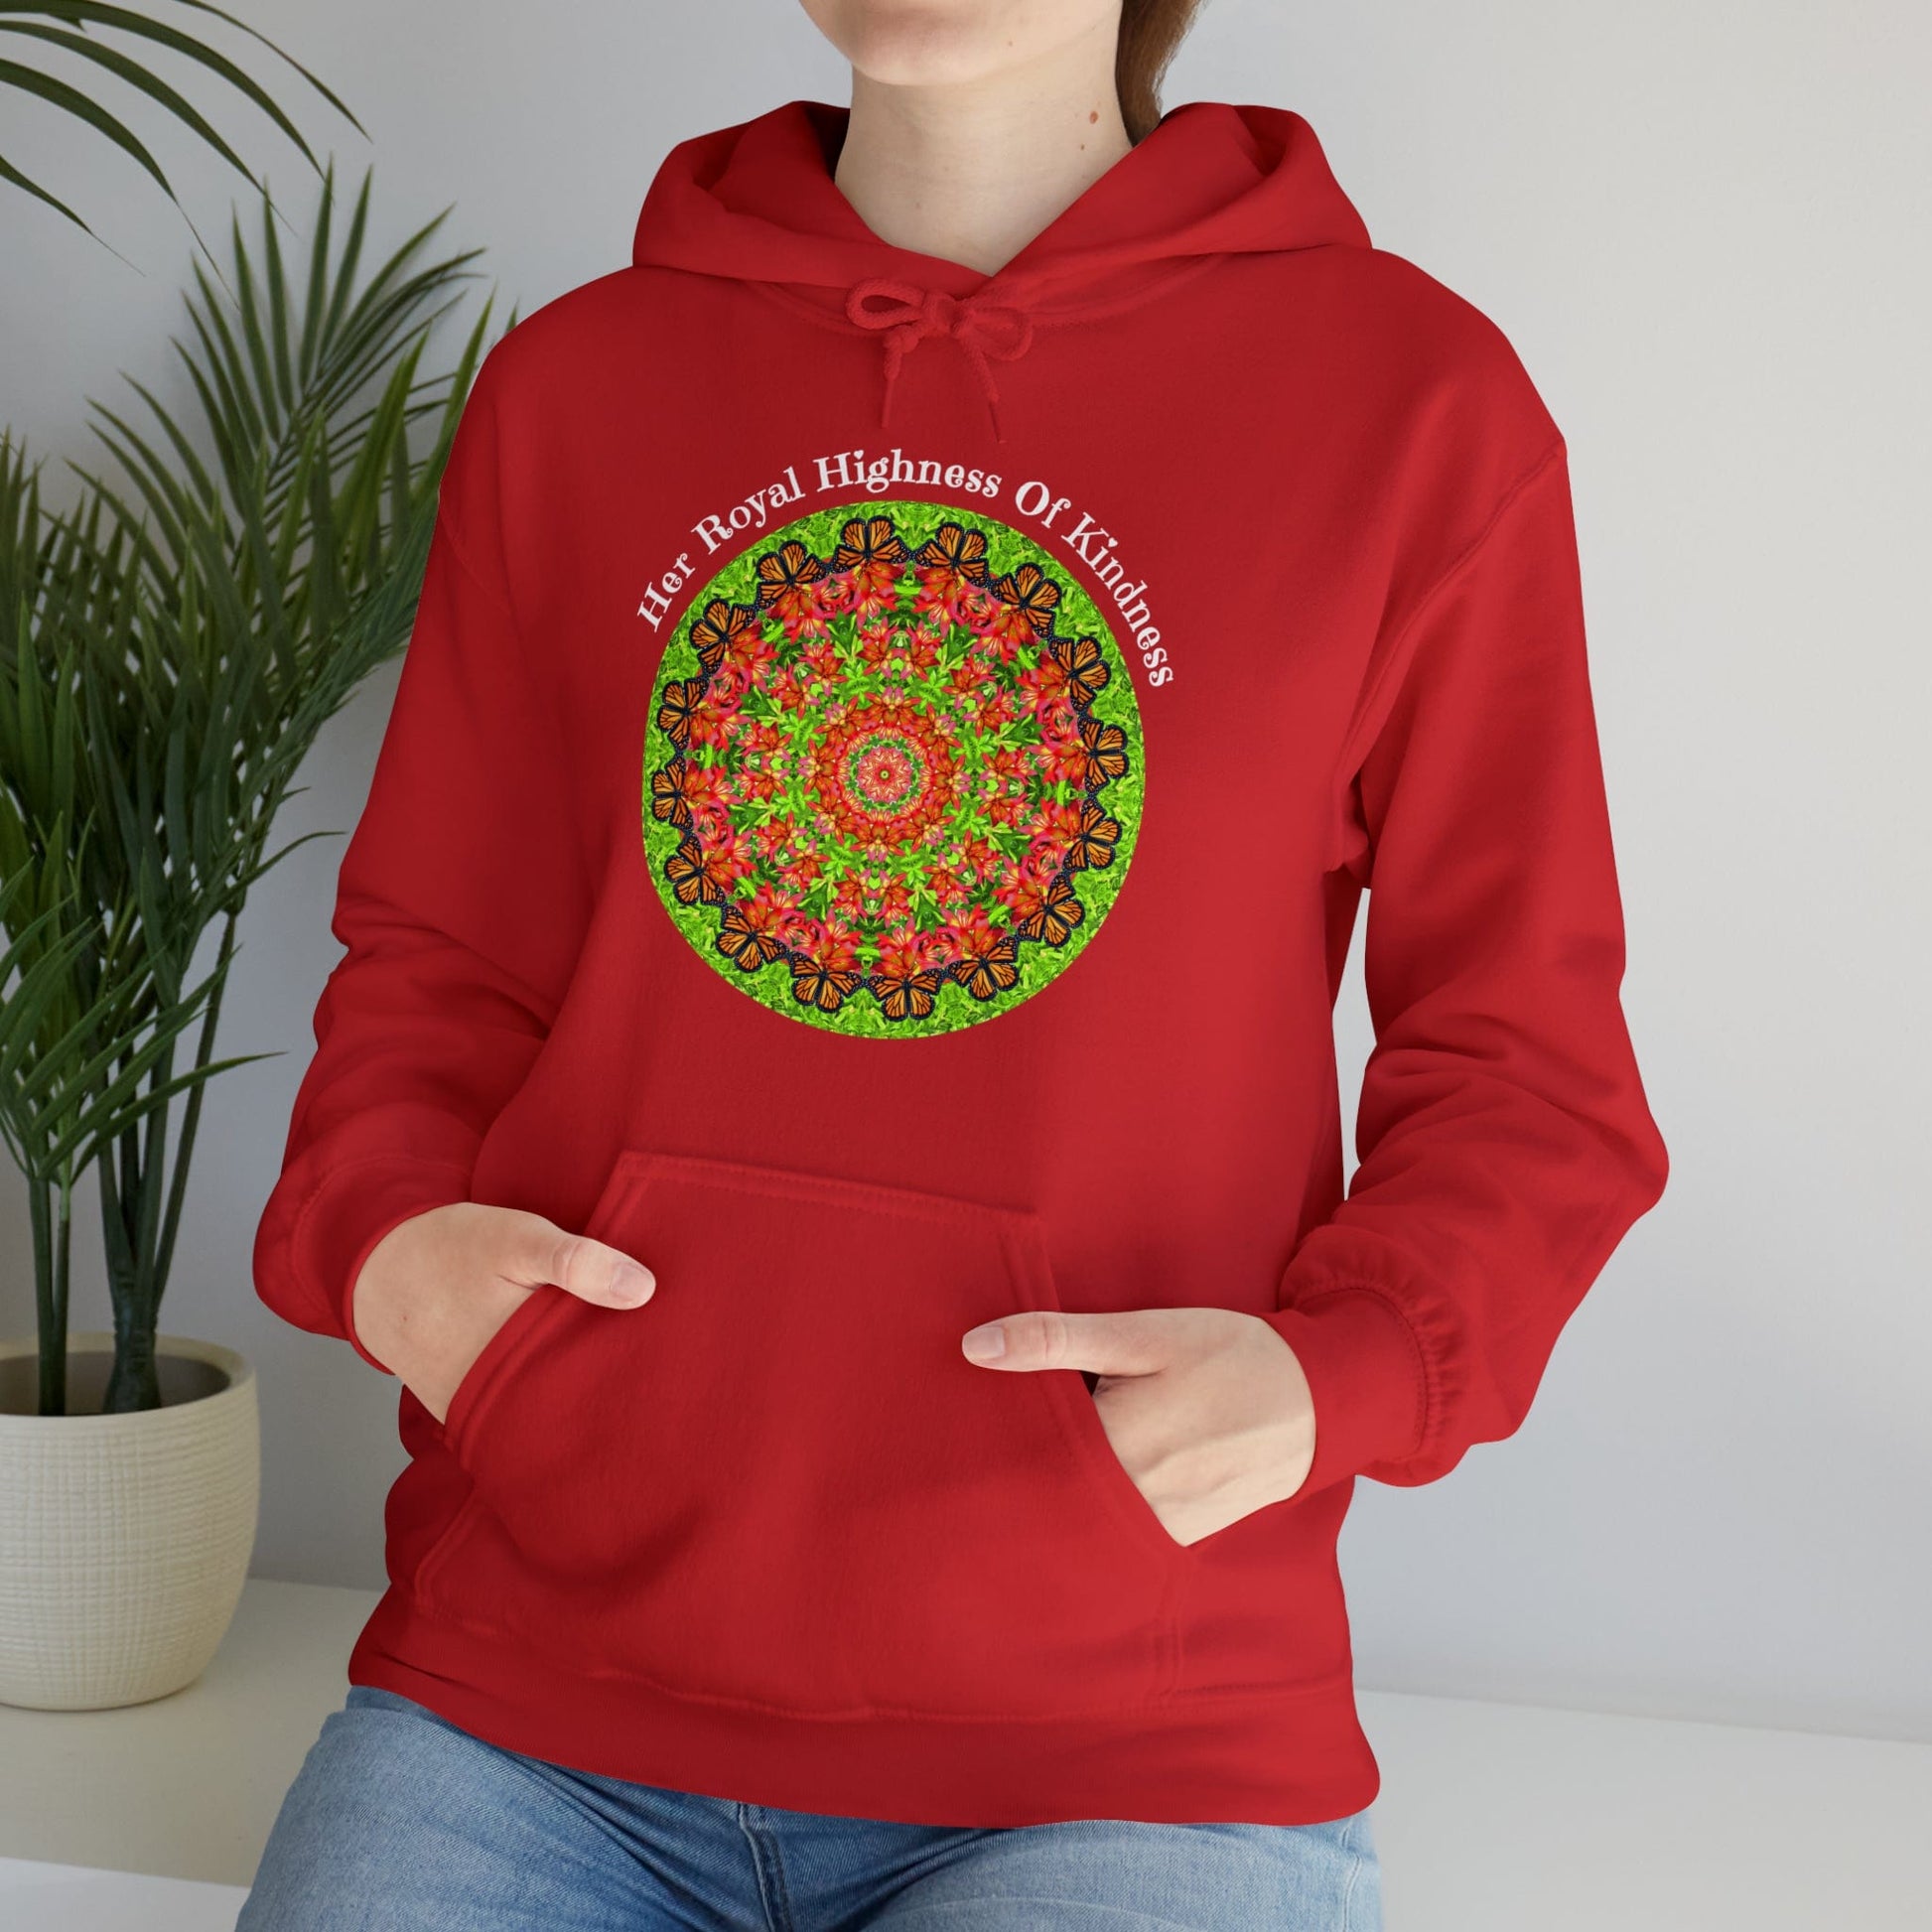 Monarch Butterfly Love Sweatshirt Pullover Hoodie – Her Royal Highness Of Kindness red